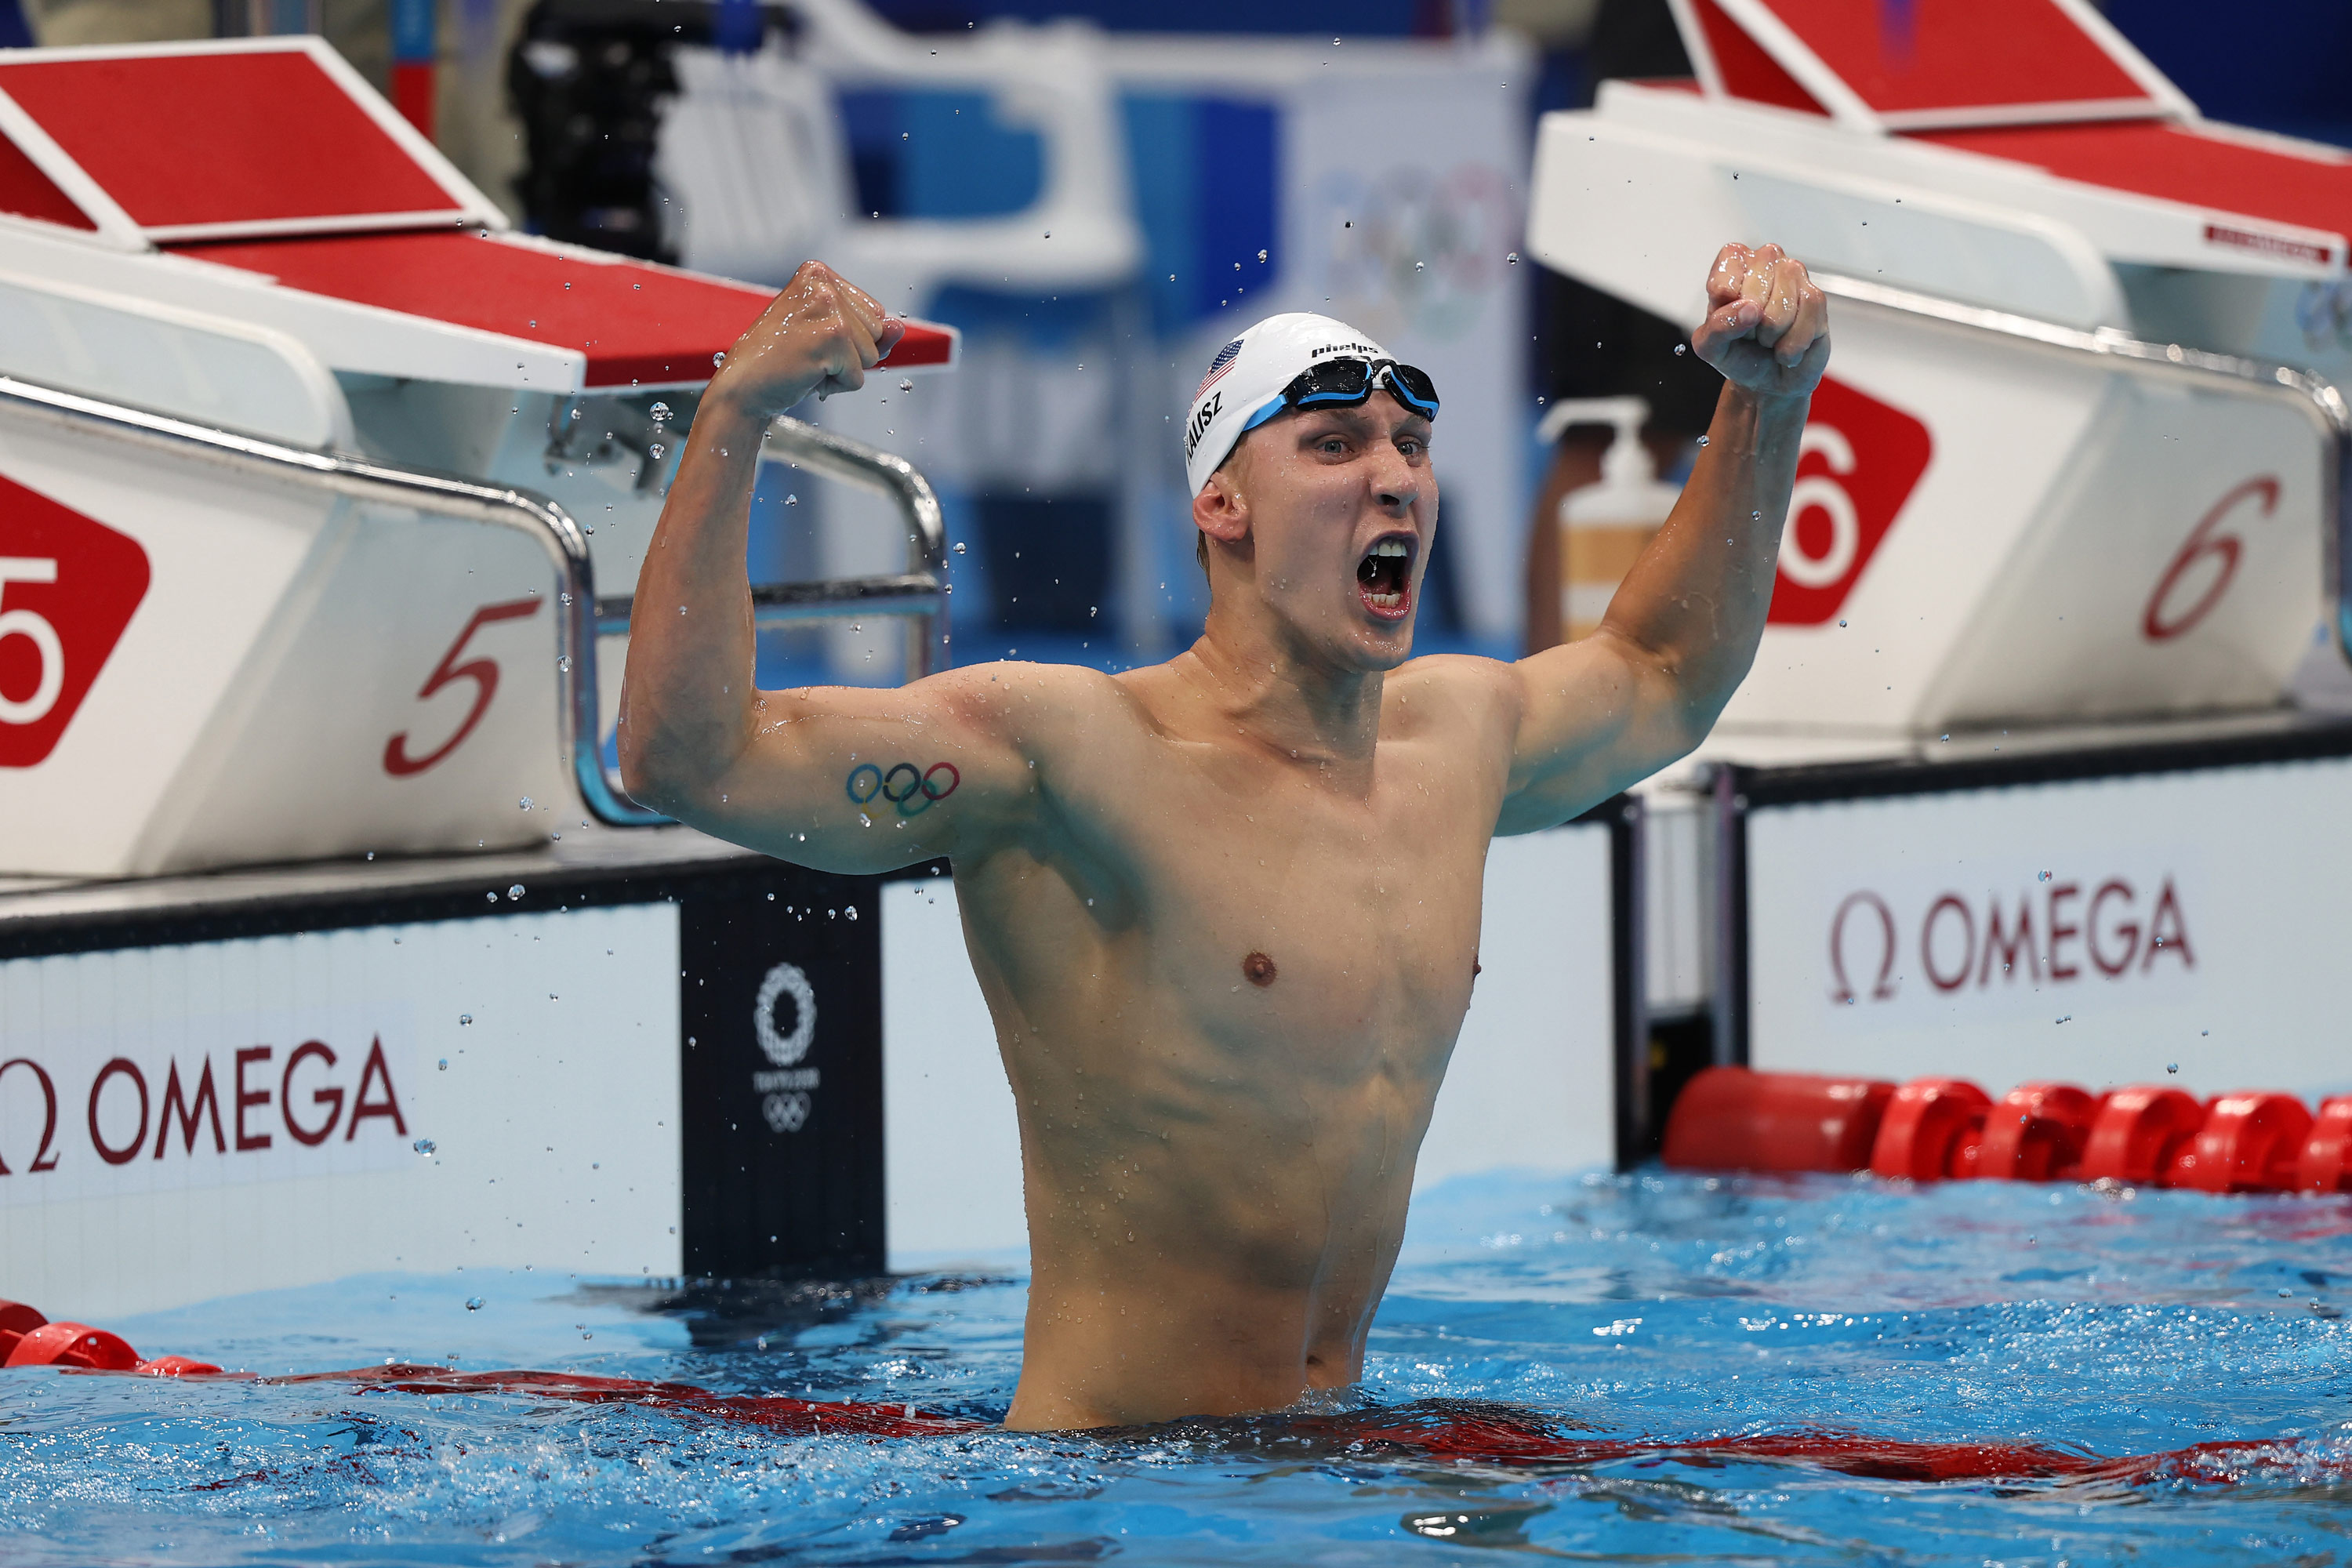 Chase Kalisz of Team United States celebrates after winning the Men's 400m Individual Medley Final on July 25.